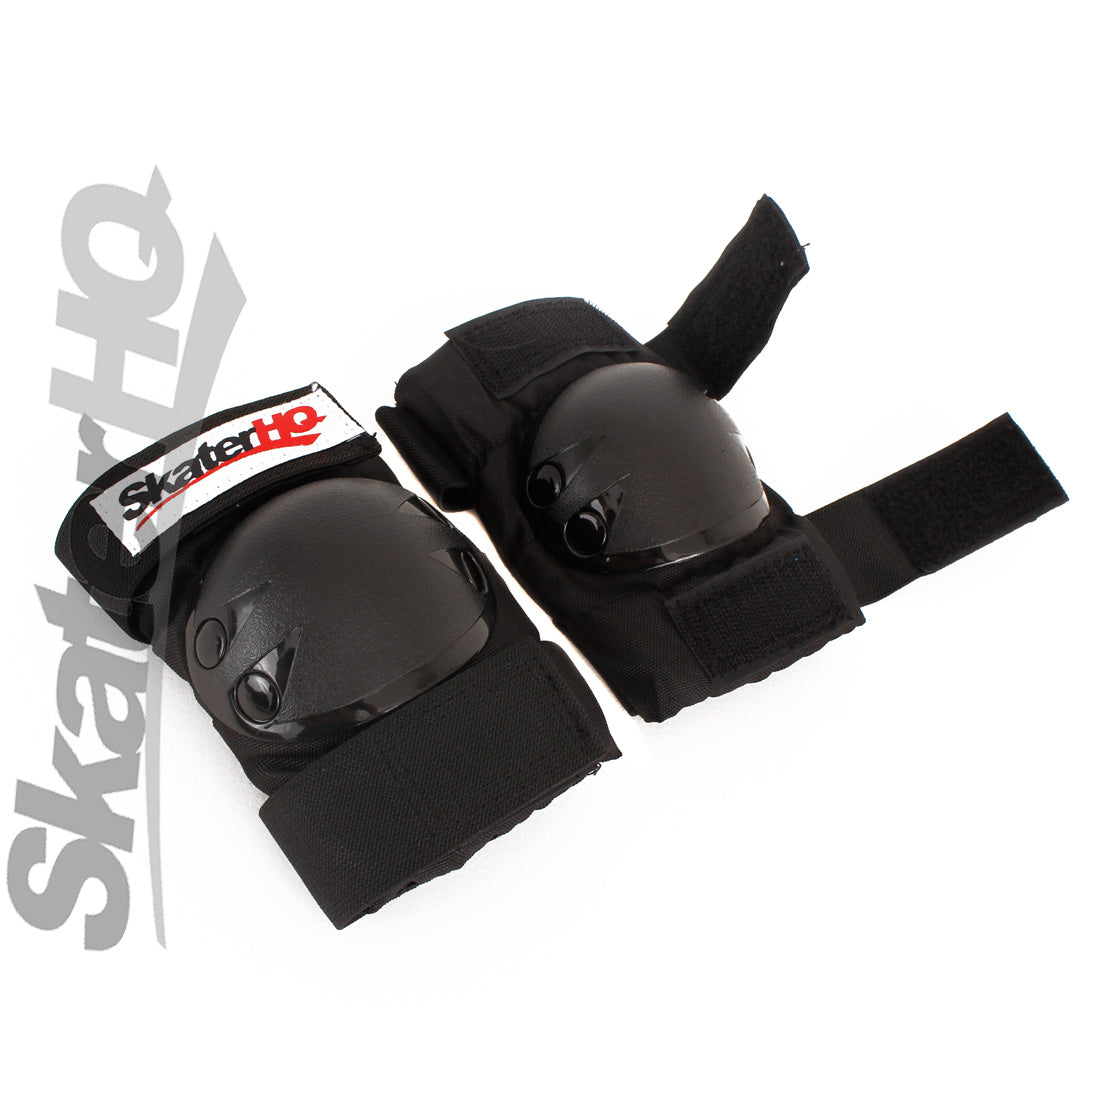 Skater HQ Elbow Pads - Junior Protective Gear